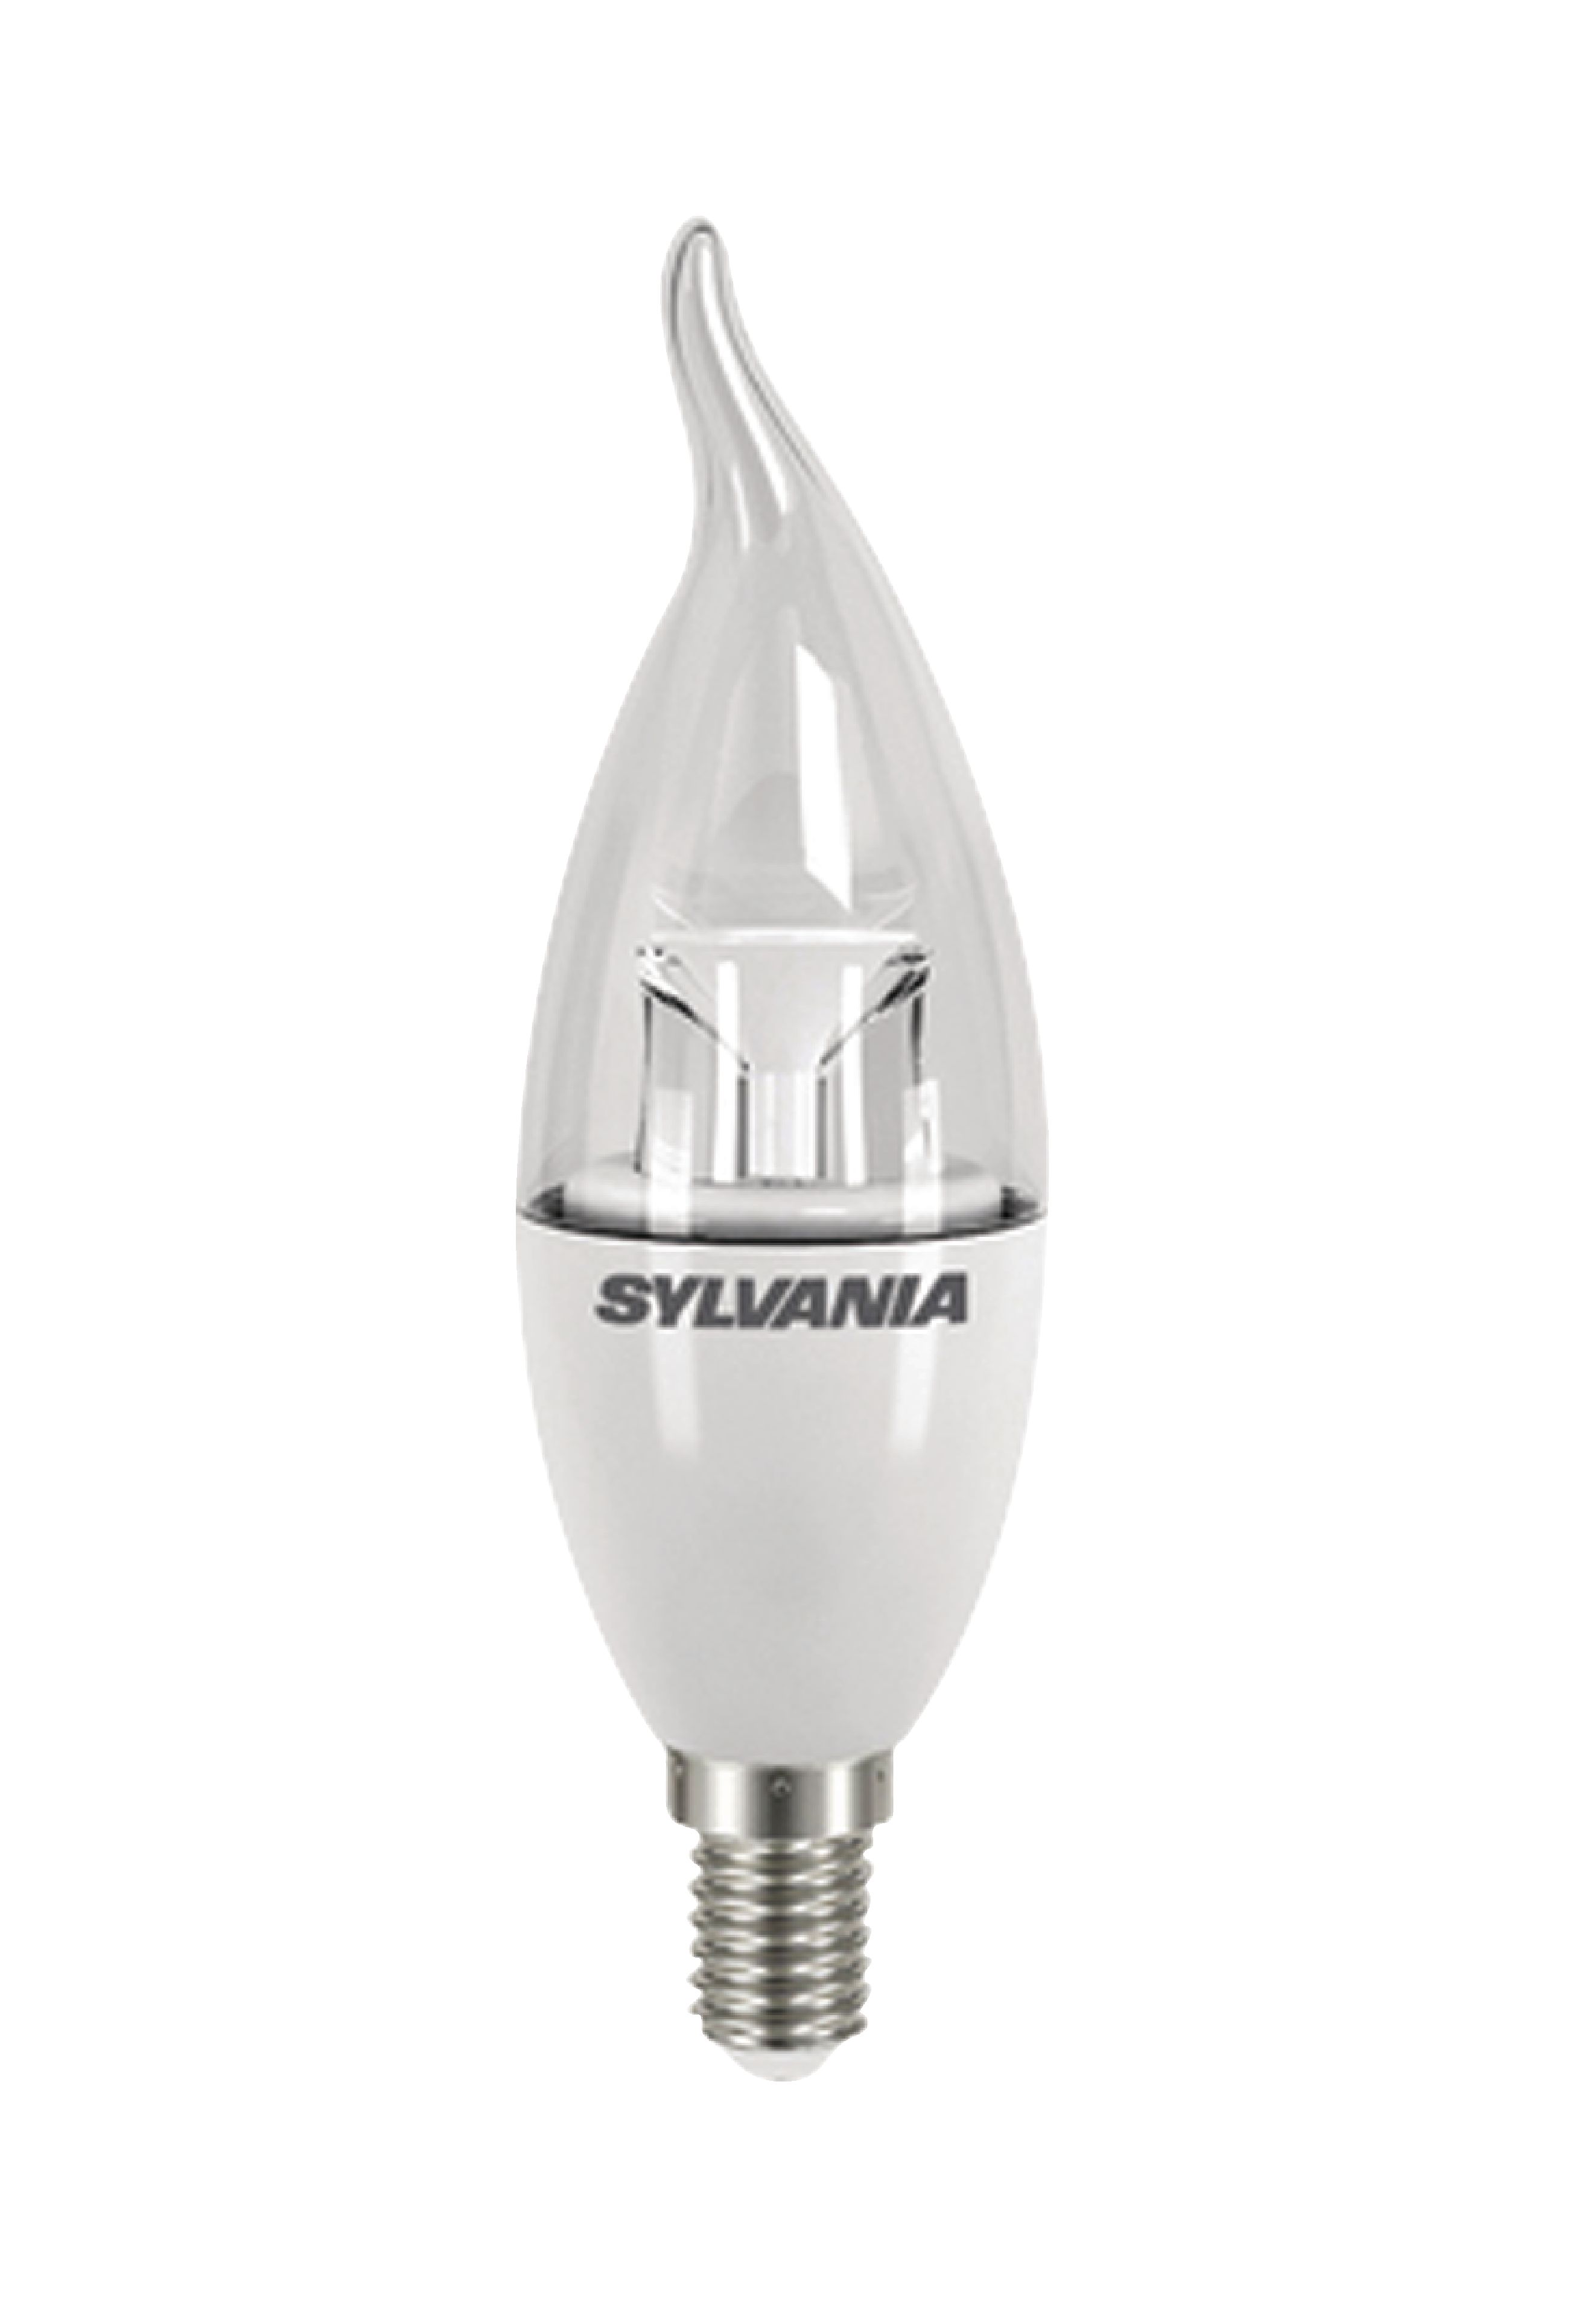 NEW Genuine Sylvania LED Lamp E14 Candle Bent Flame Tip 6.5W 470 lm 2700 K Clear - Picture 1 of 1